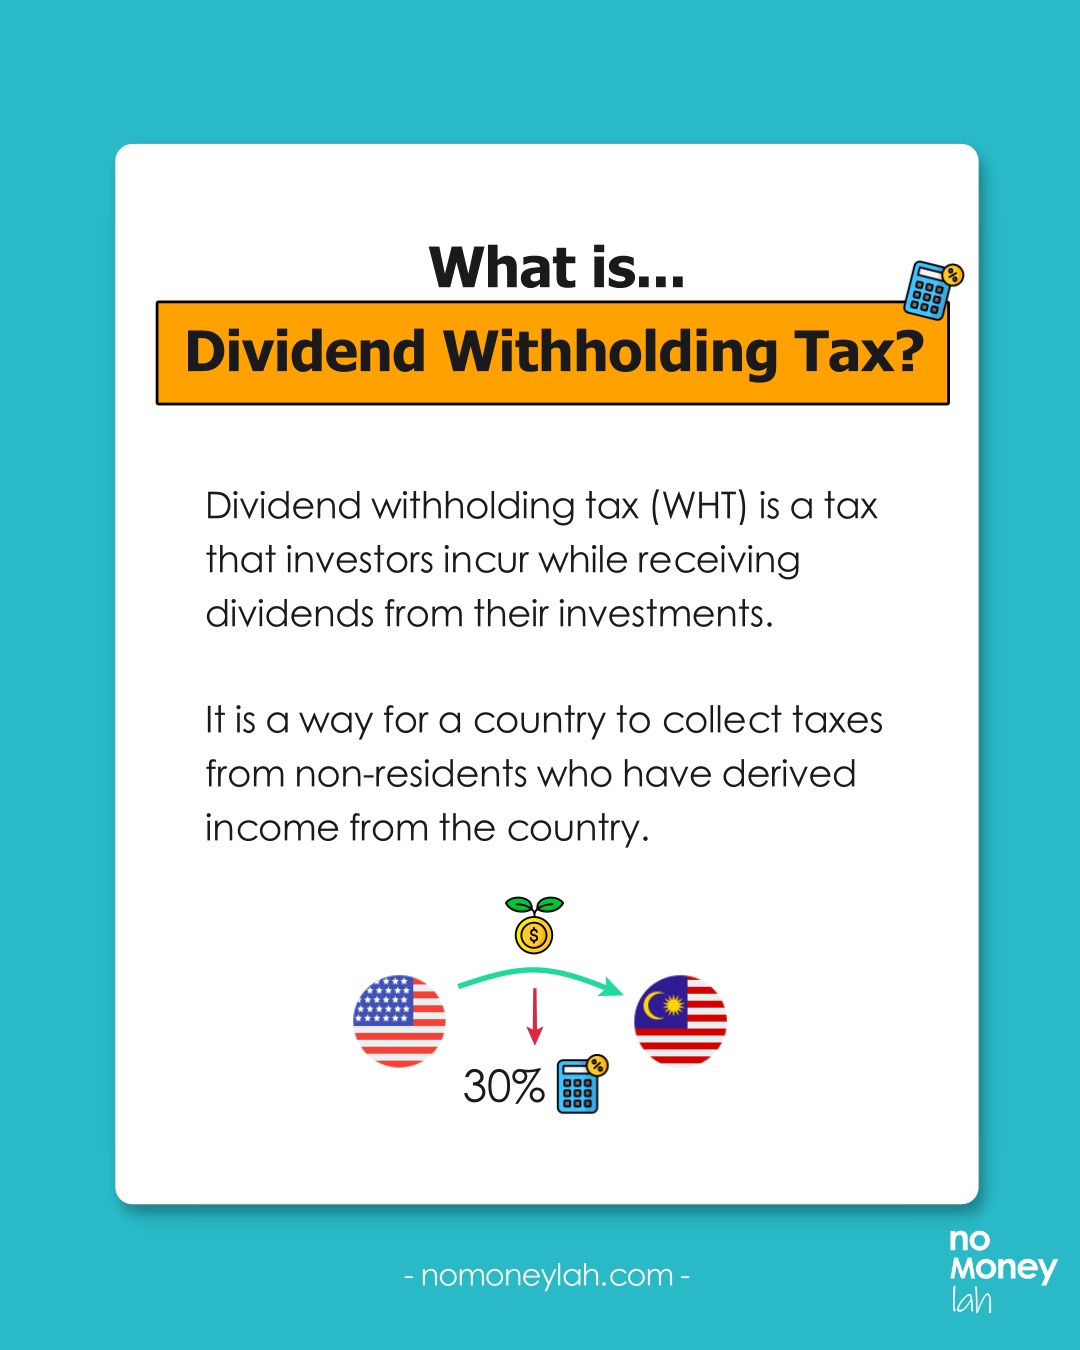 What is Dividend Withholding Tax